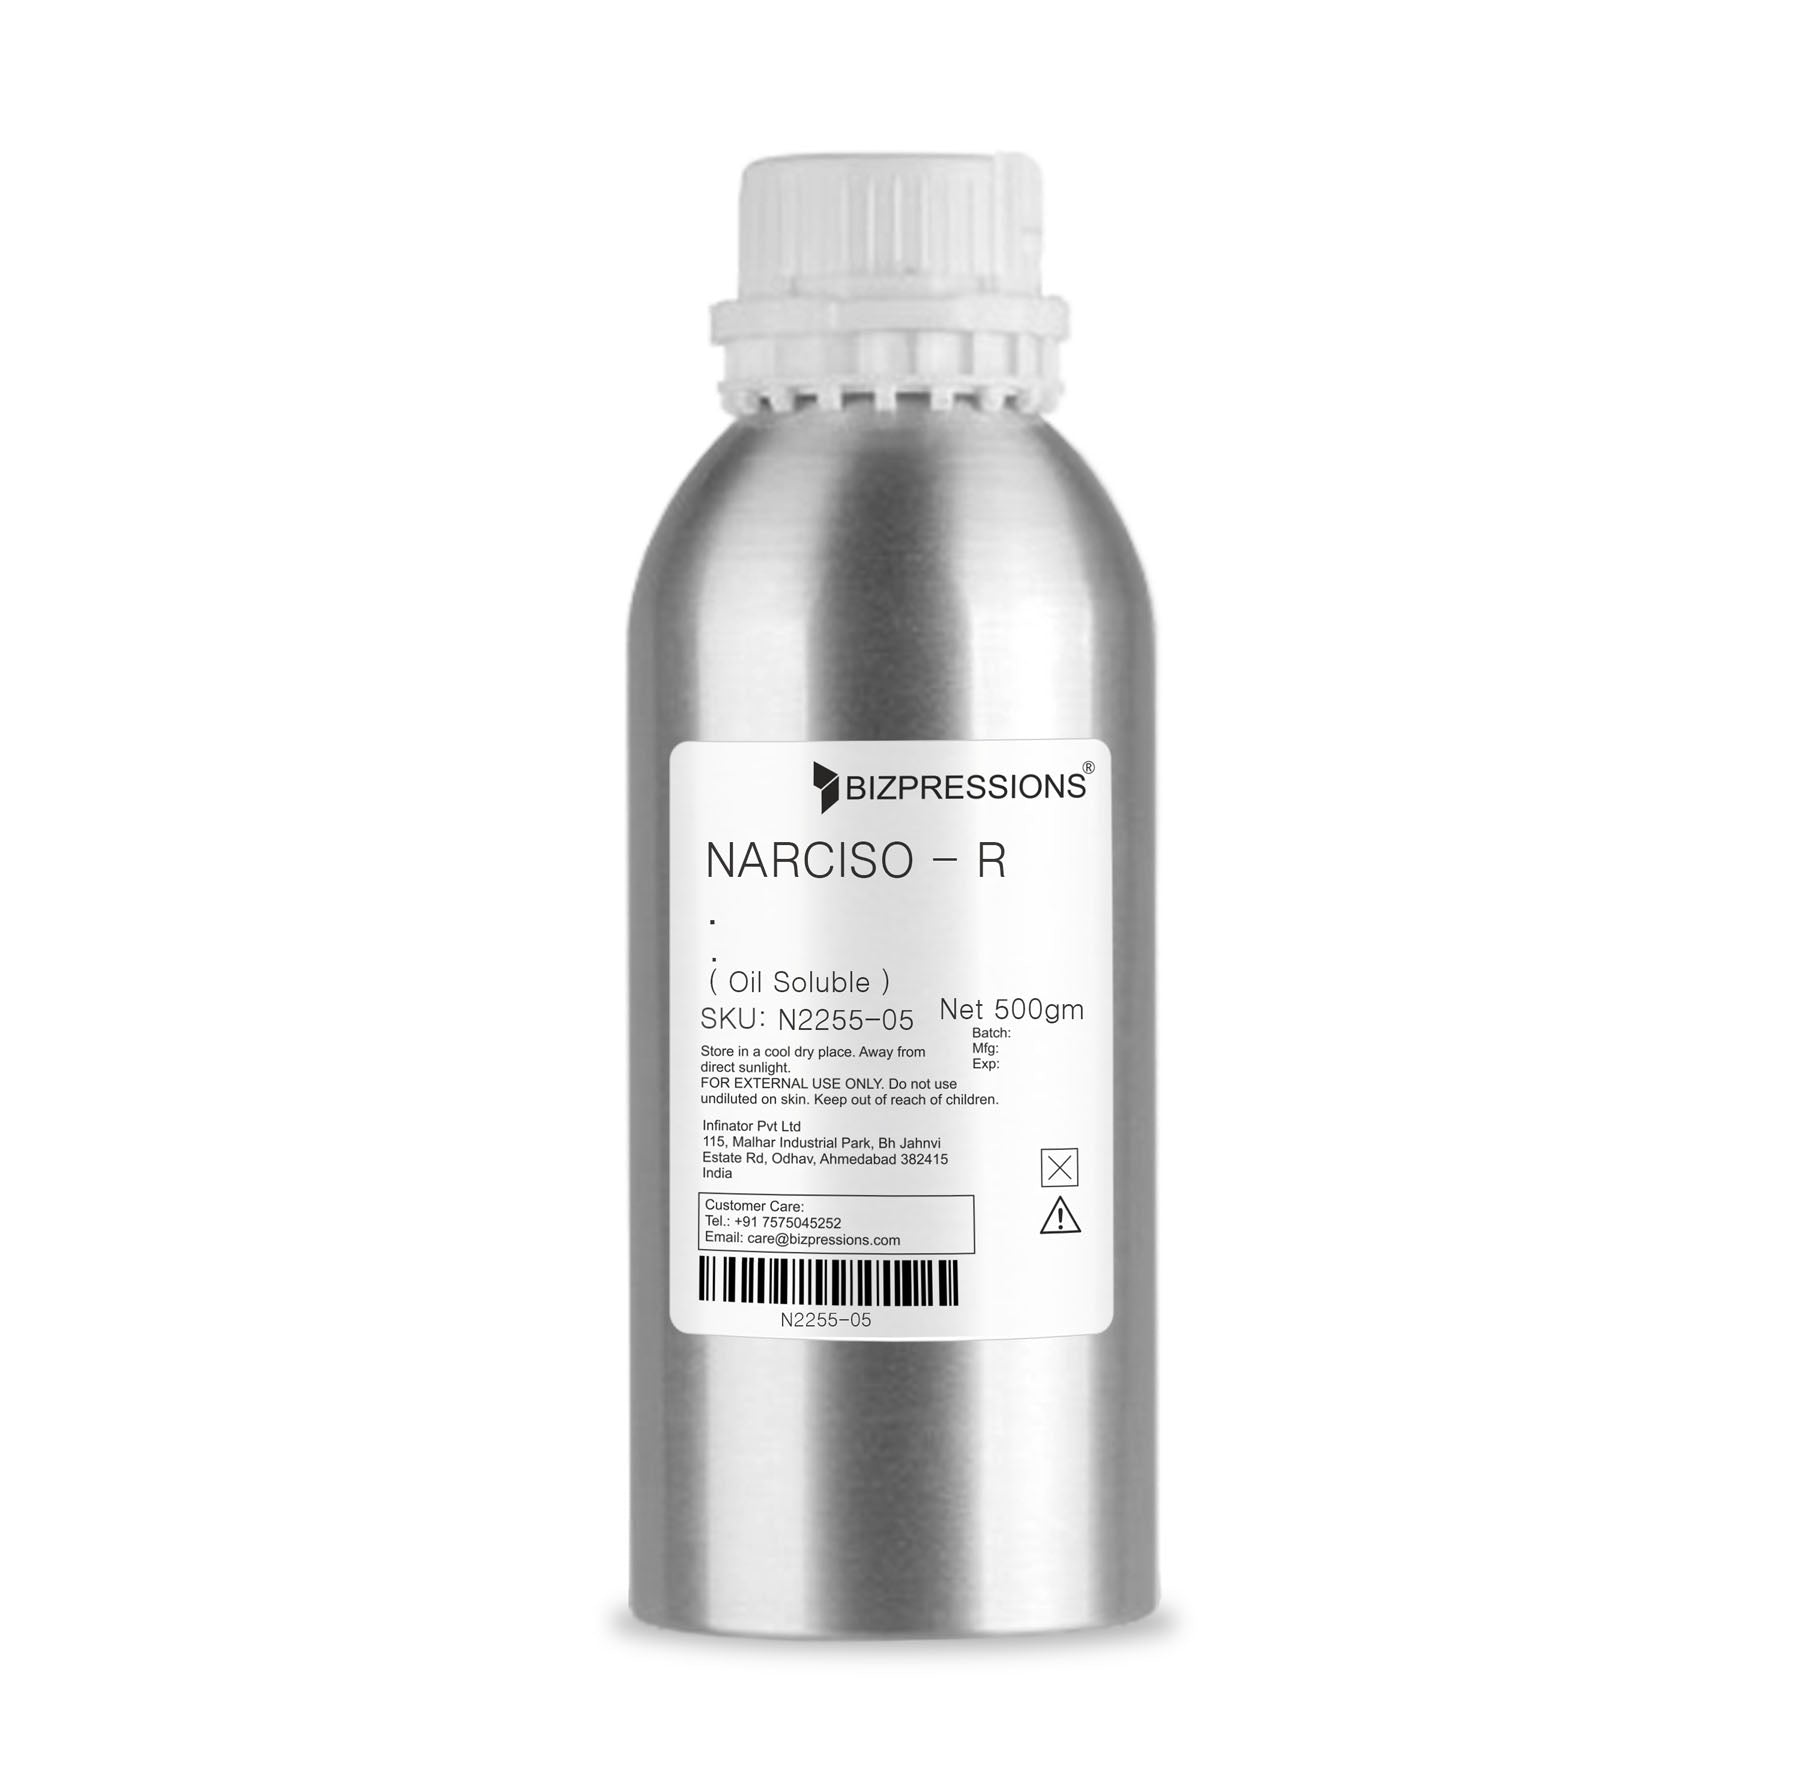 NARCISO - R - Fragrance ( Oil Soluble ) - 500 gm